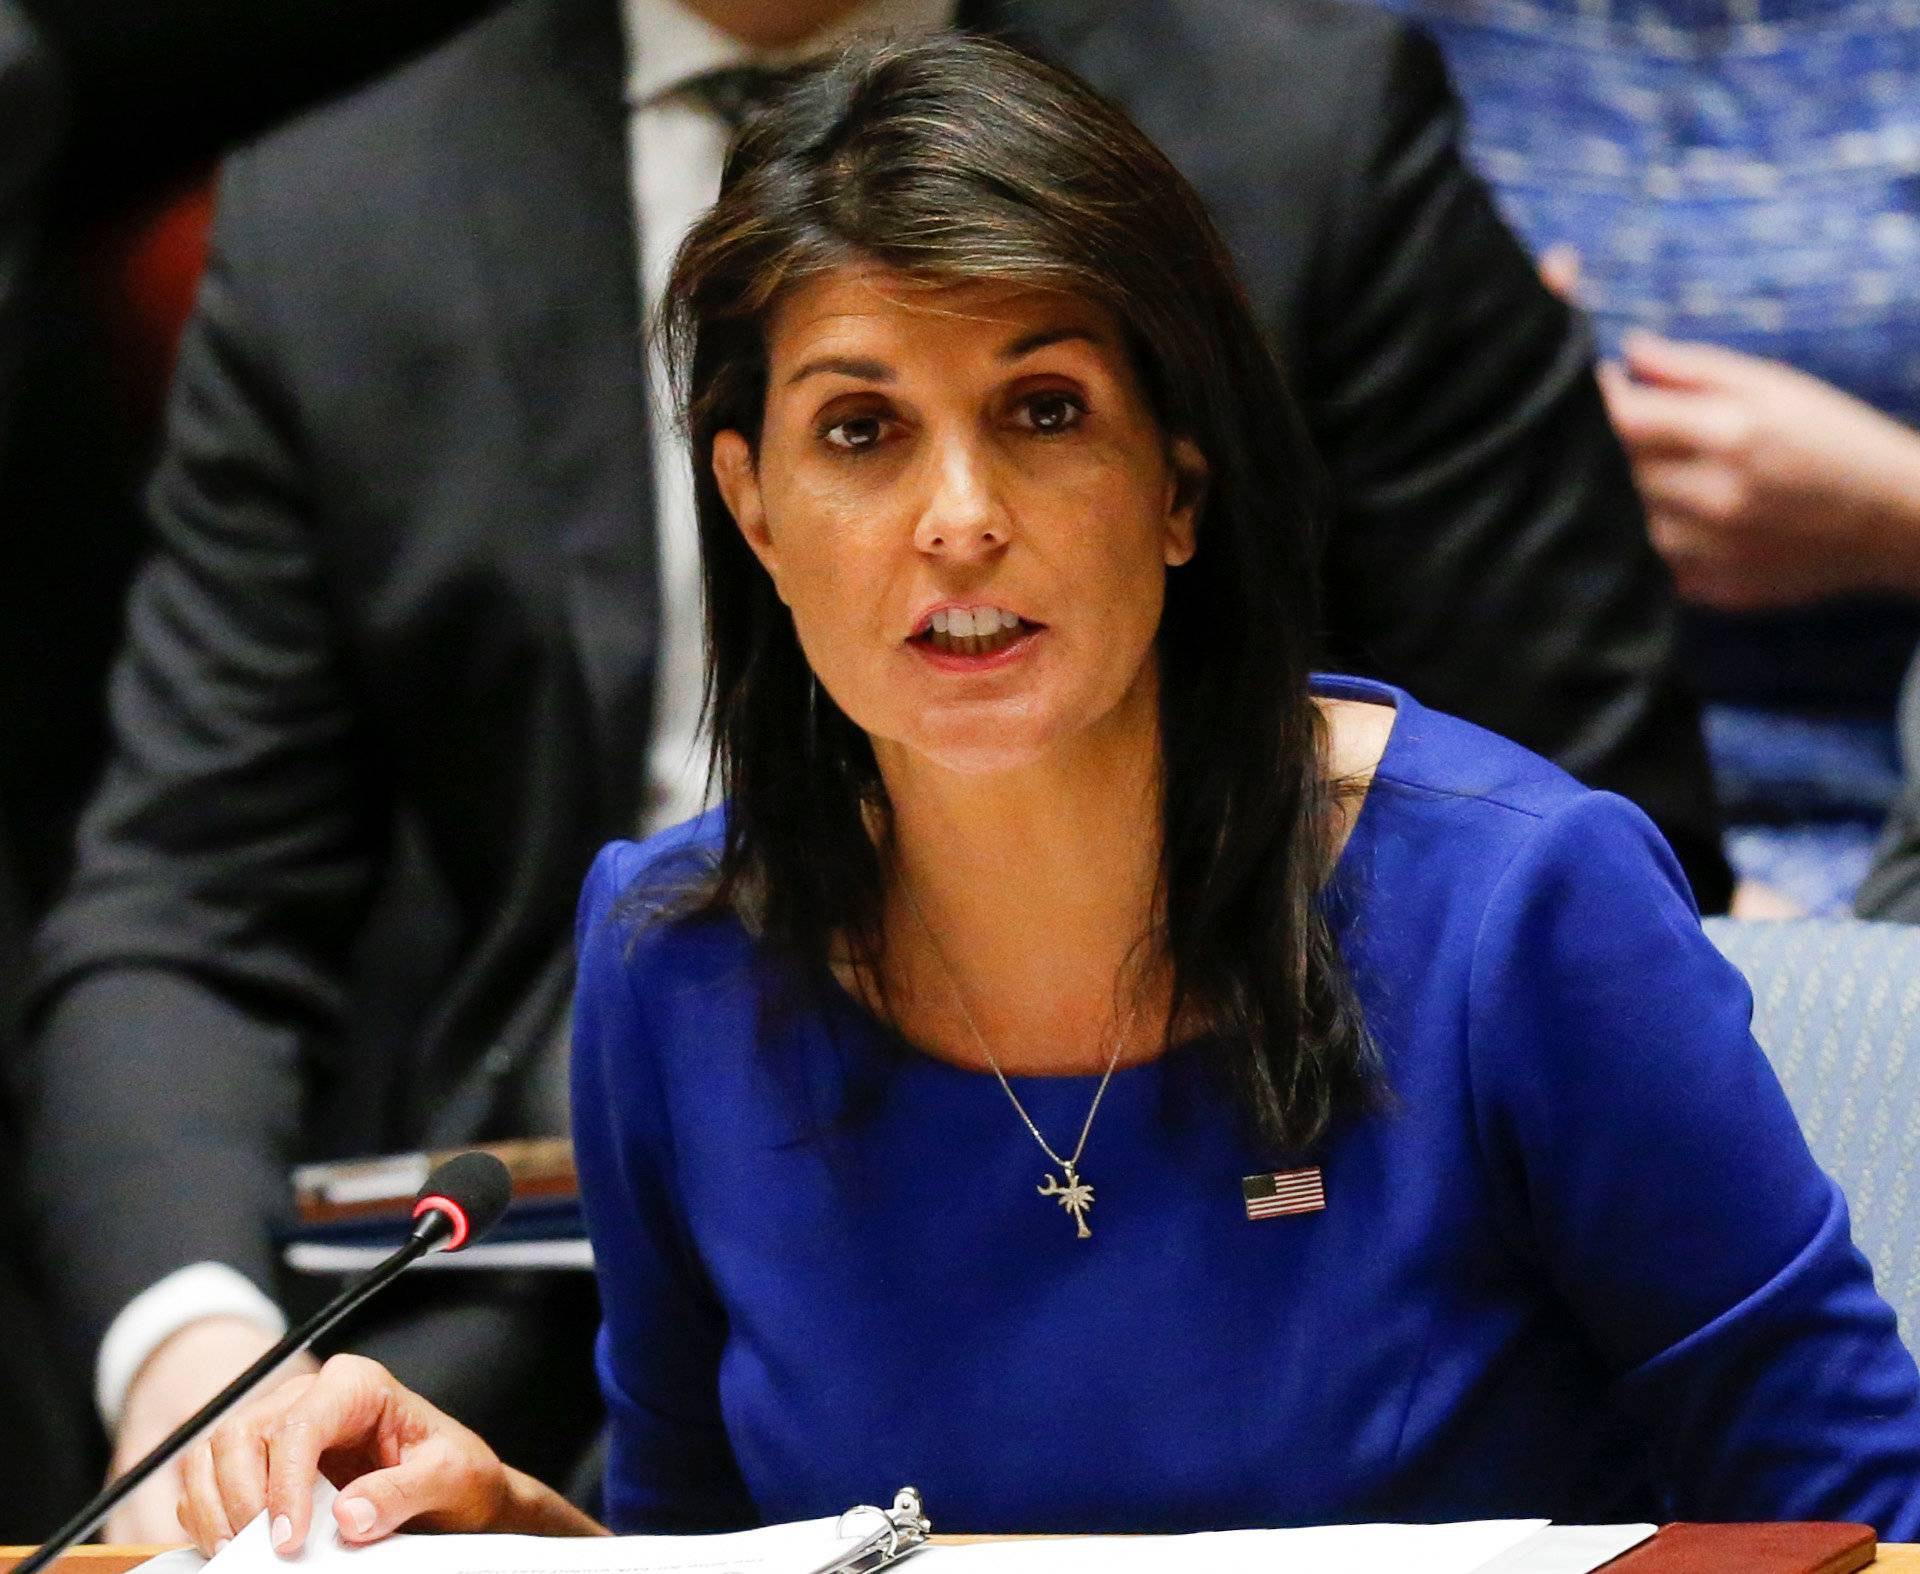 United States Ambassador to the United Nations Haley speaks during the emergency United Nations Security Council meeting on Syria at the U.N. headquarters in New York